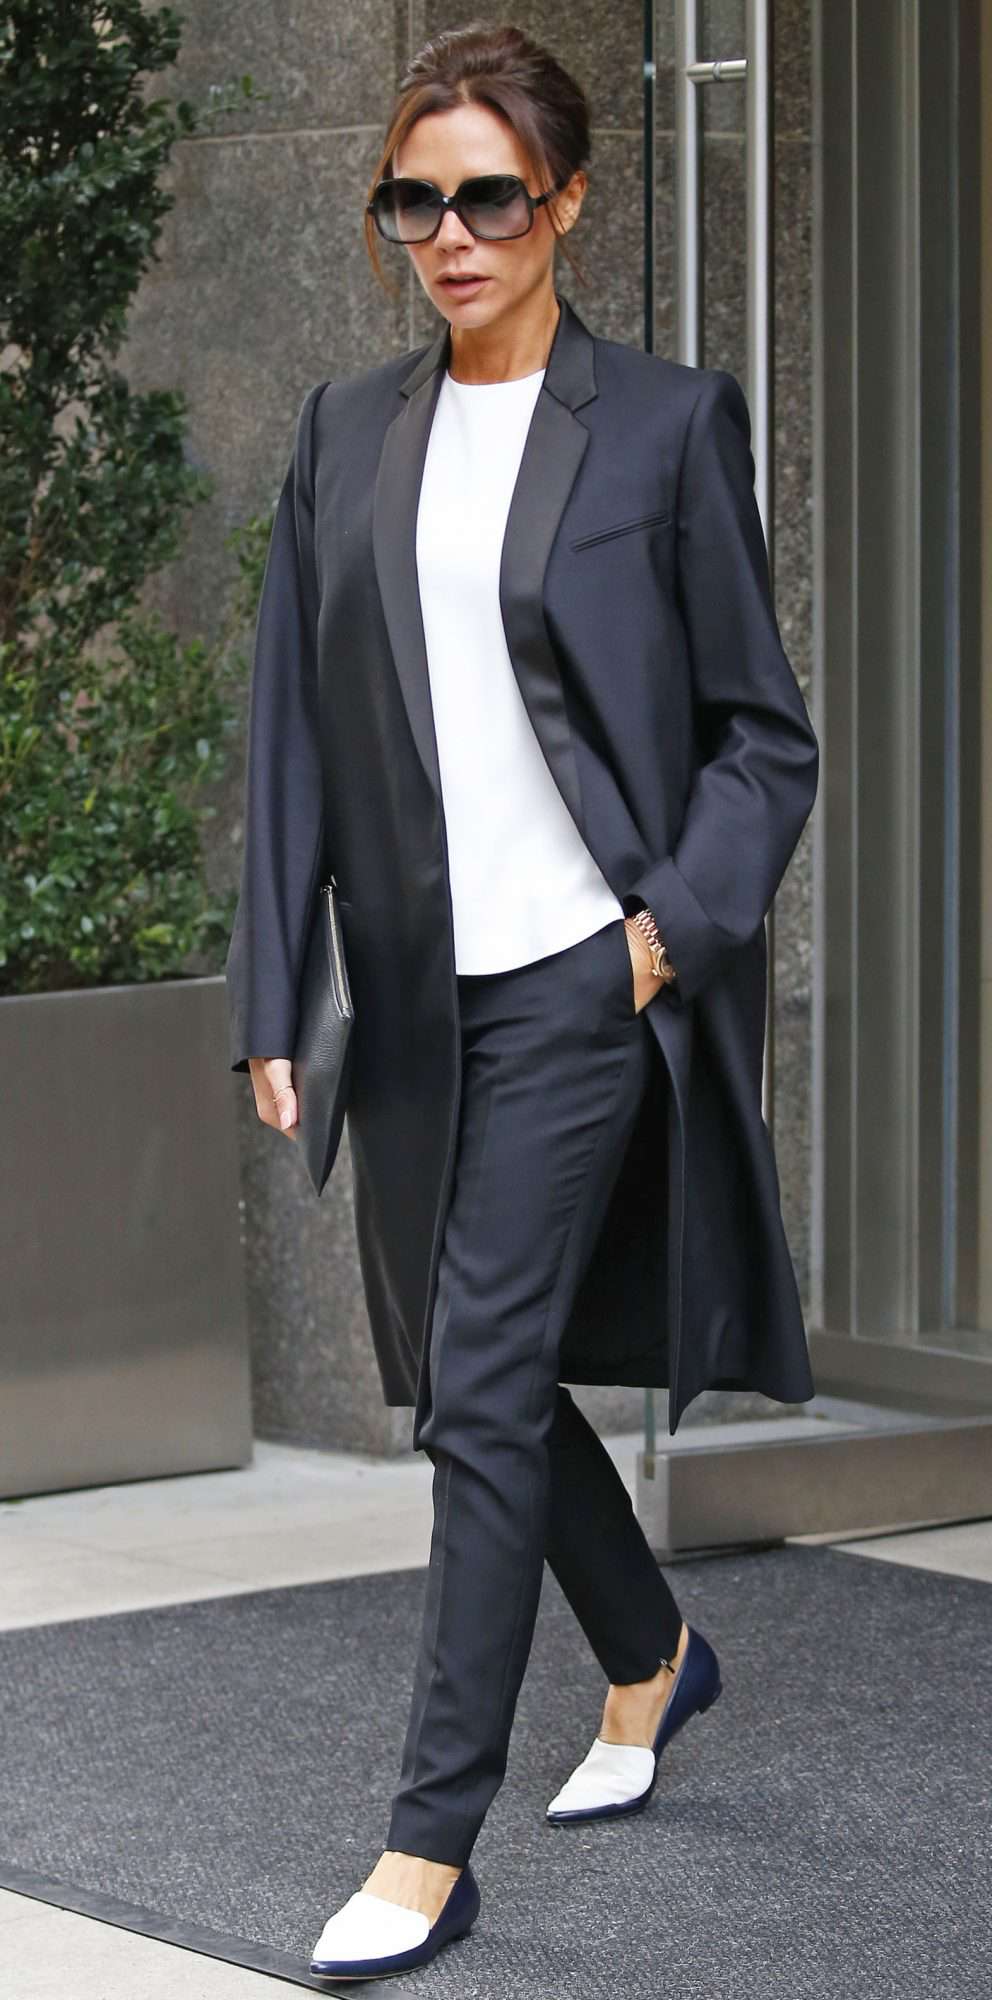 Victoria Beckham leaves her hotel to attend the Social Good Summit in NYC